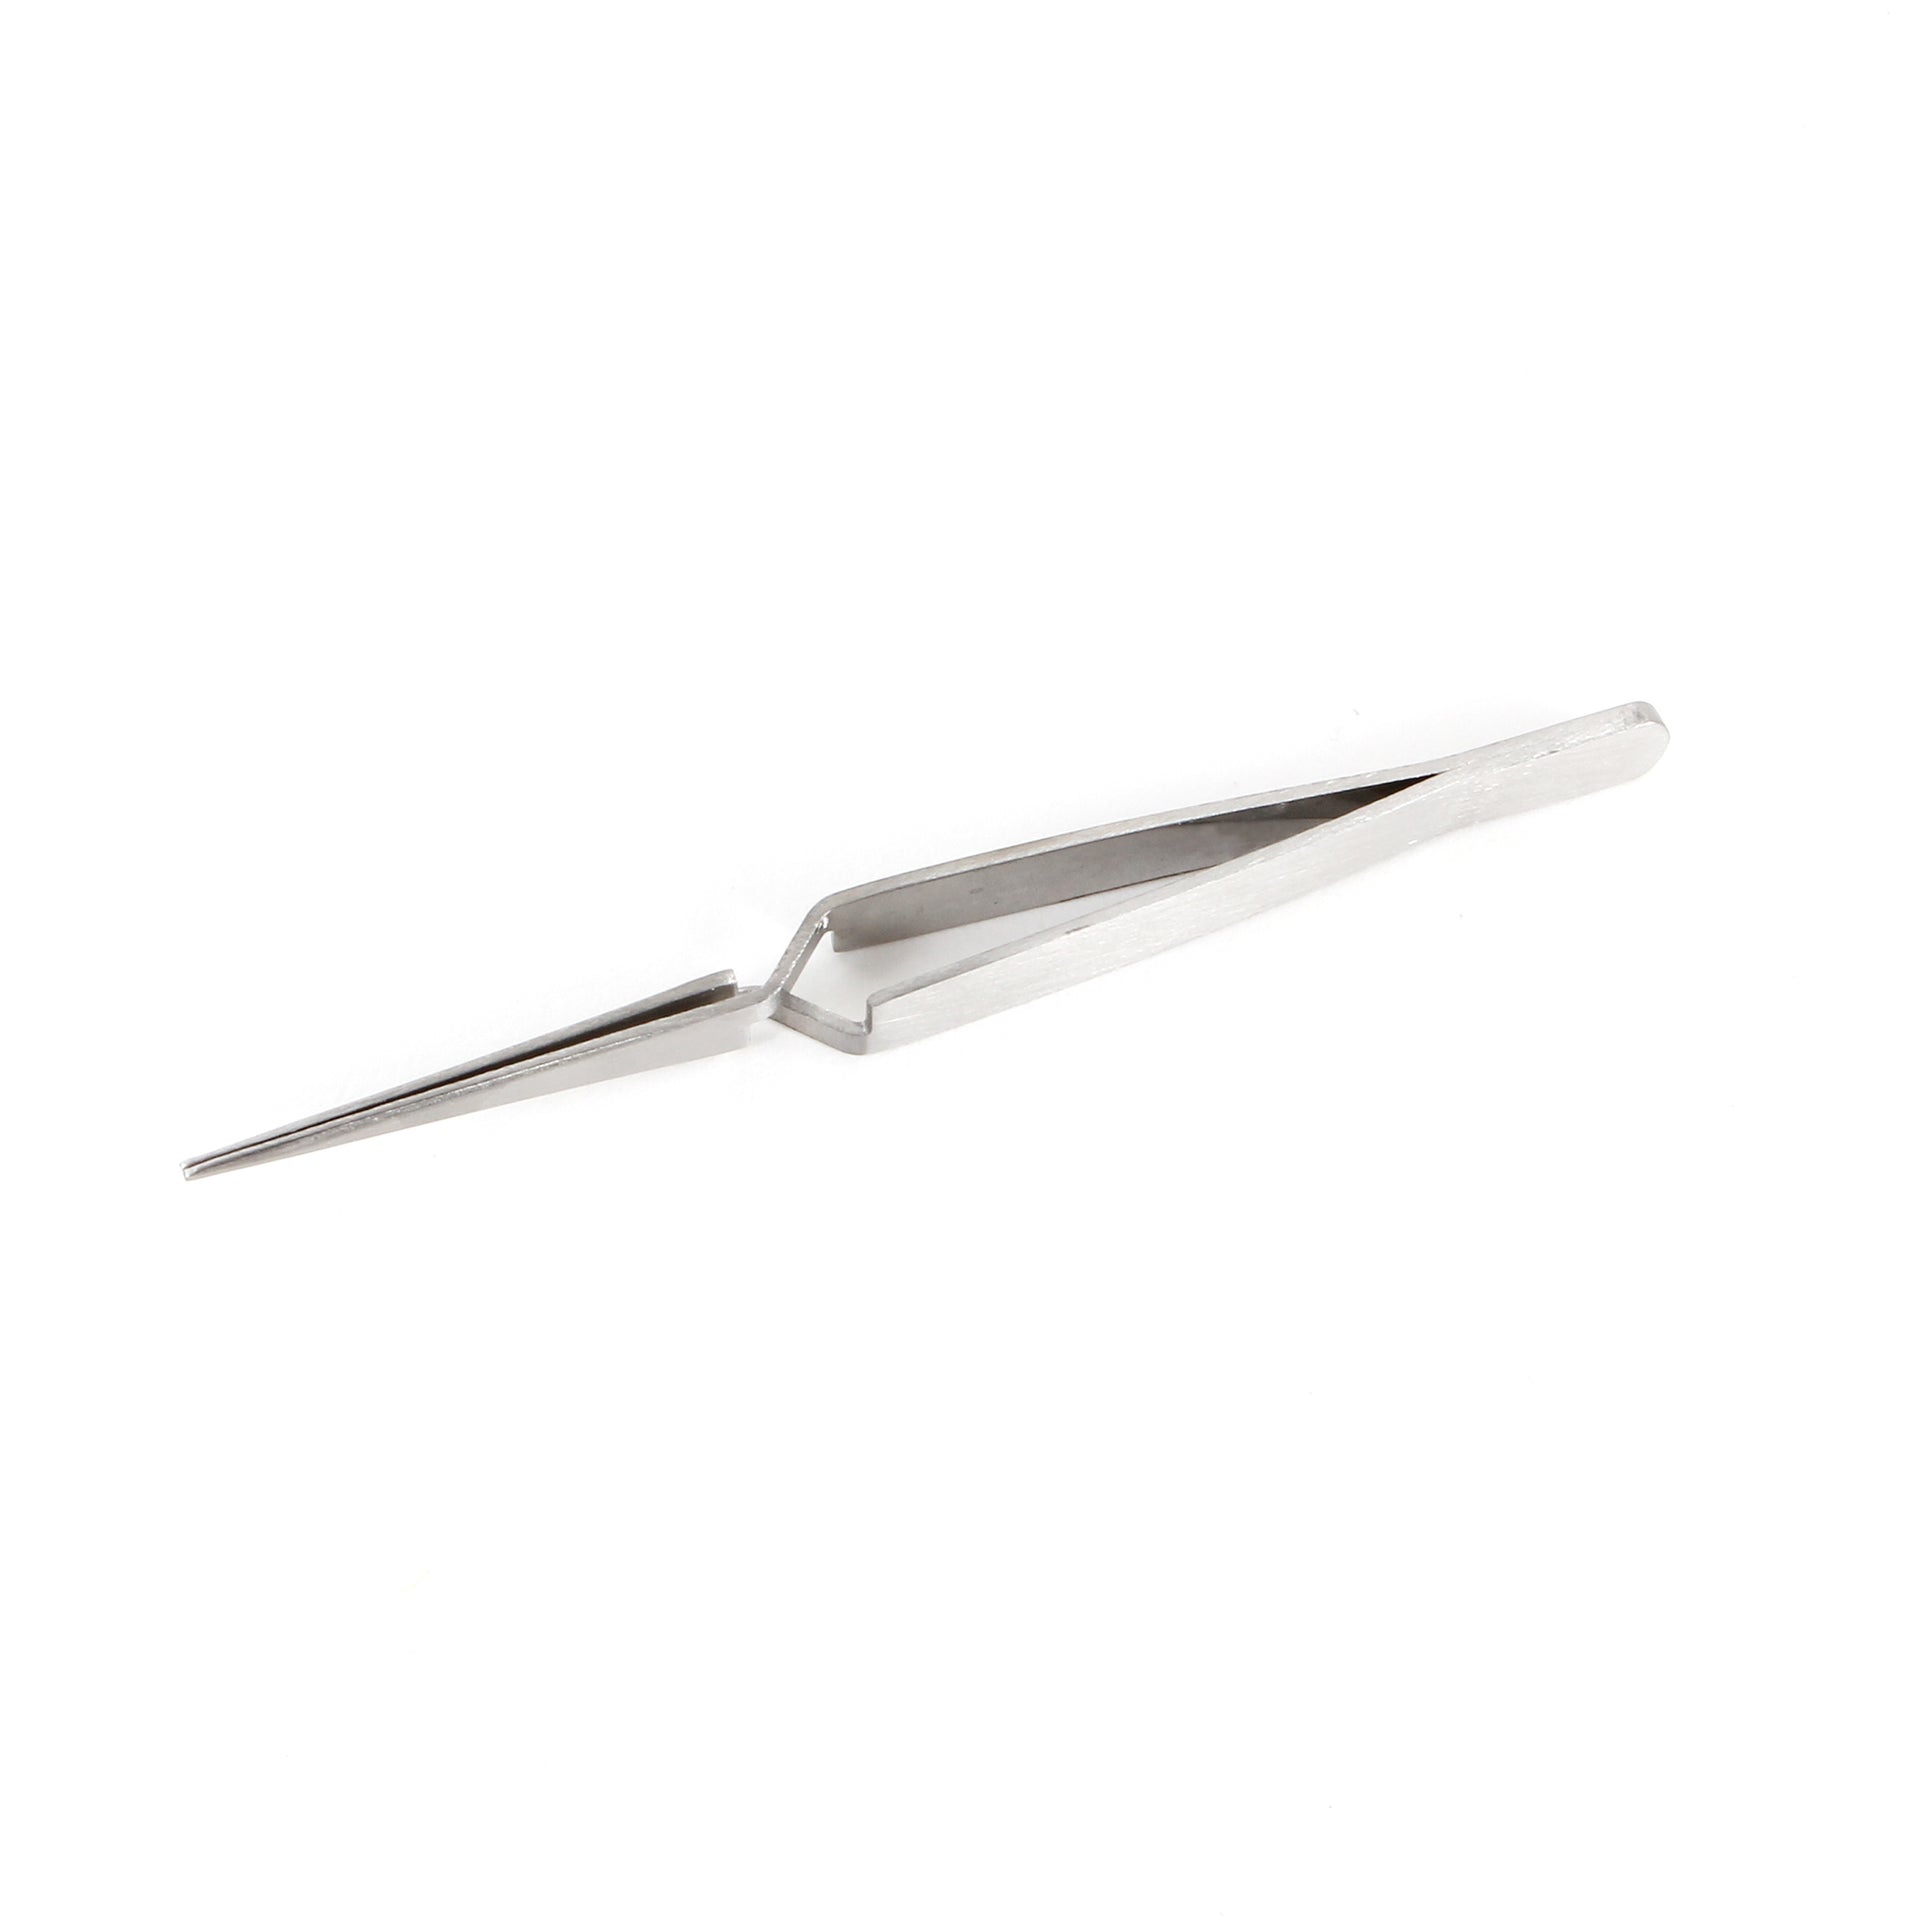 Reverse Tweezers With Silicone Tip